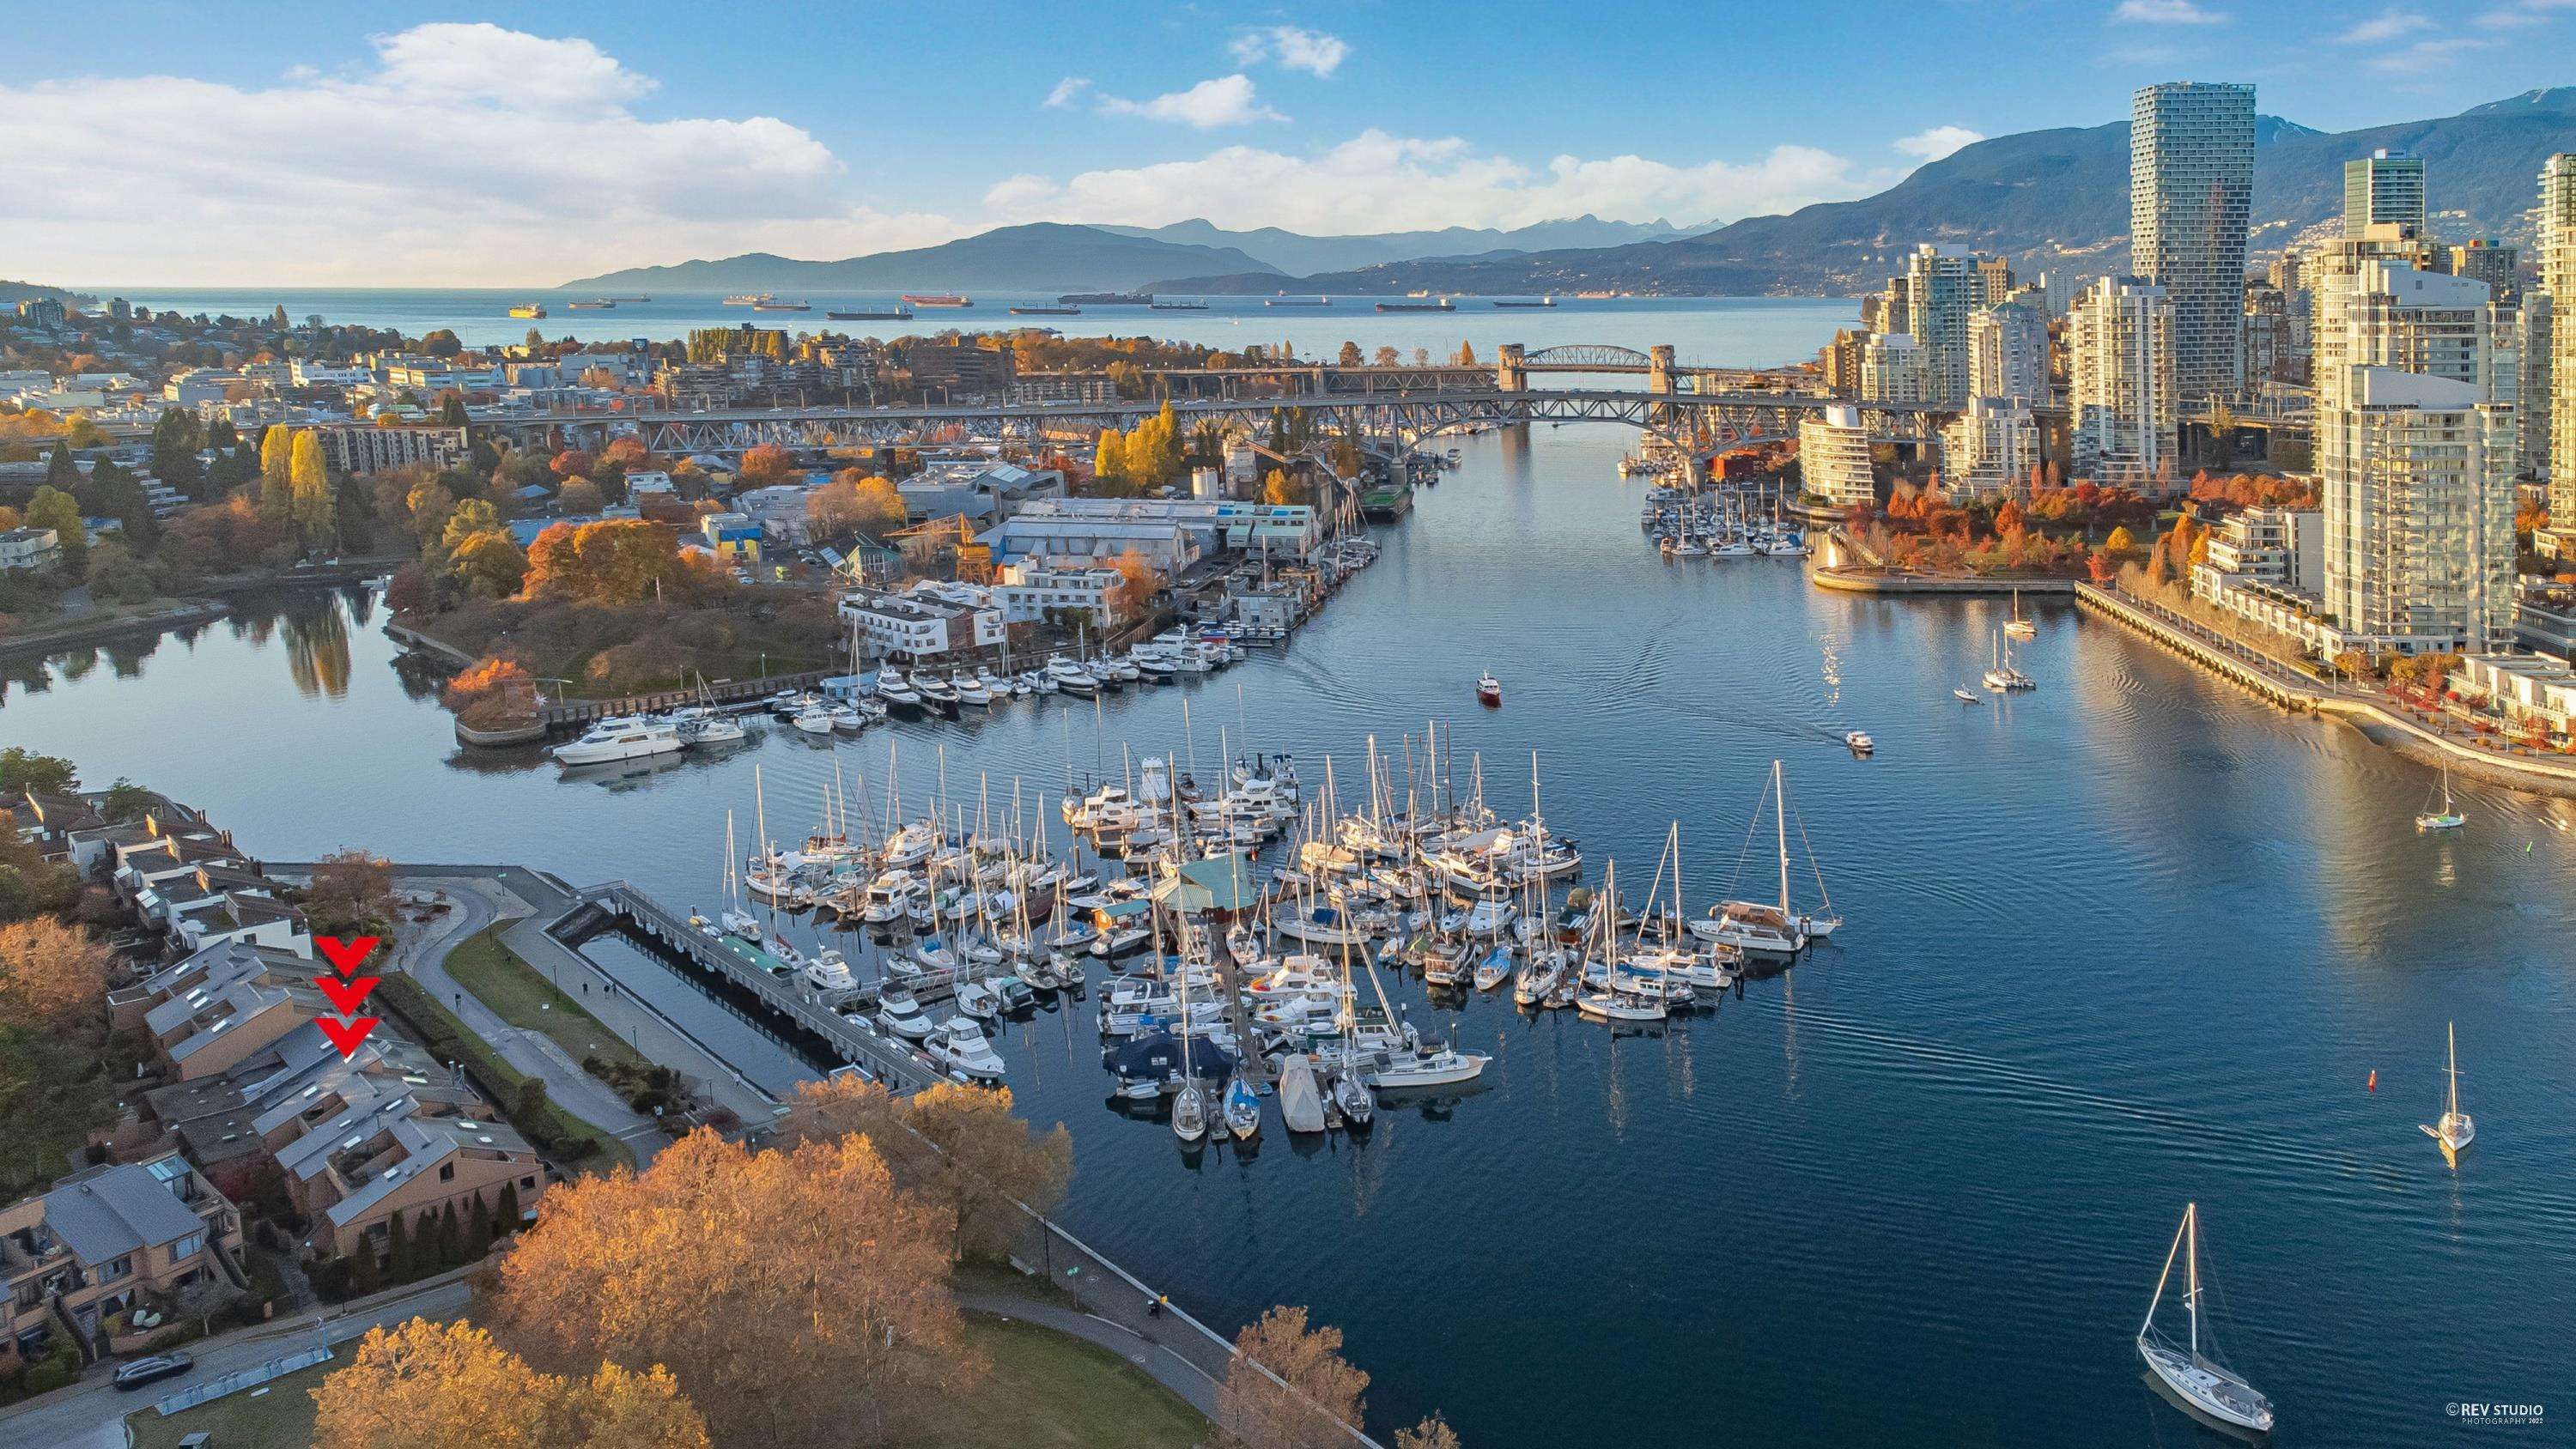 Open House. Open House on Sunday, March 19, 2023 2:00PM - 4:00PM
WATERFRONT TOWNHOUSE w/ stunning water, marina, cityscape and mtn views. 180 degree views W out to English Bay sunsets and E to the Cambie St. Bridge sunrises. Renovation by Colbrone Archite